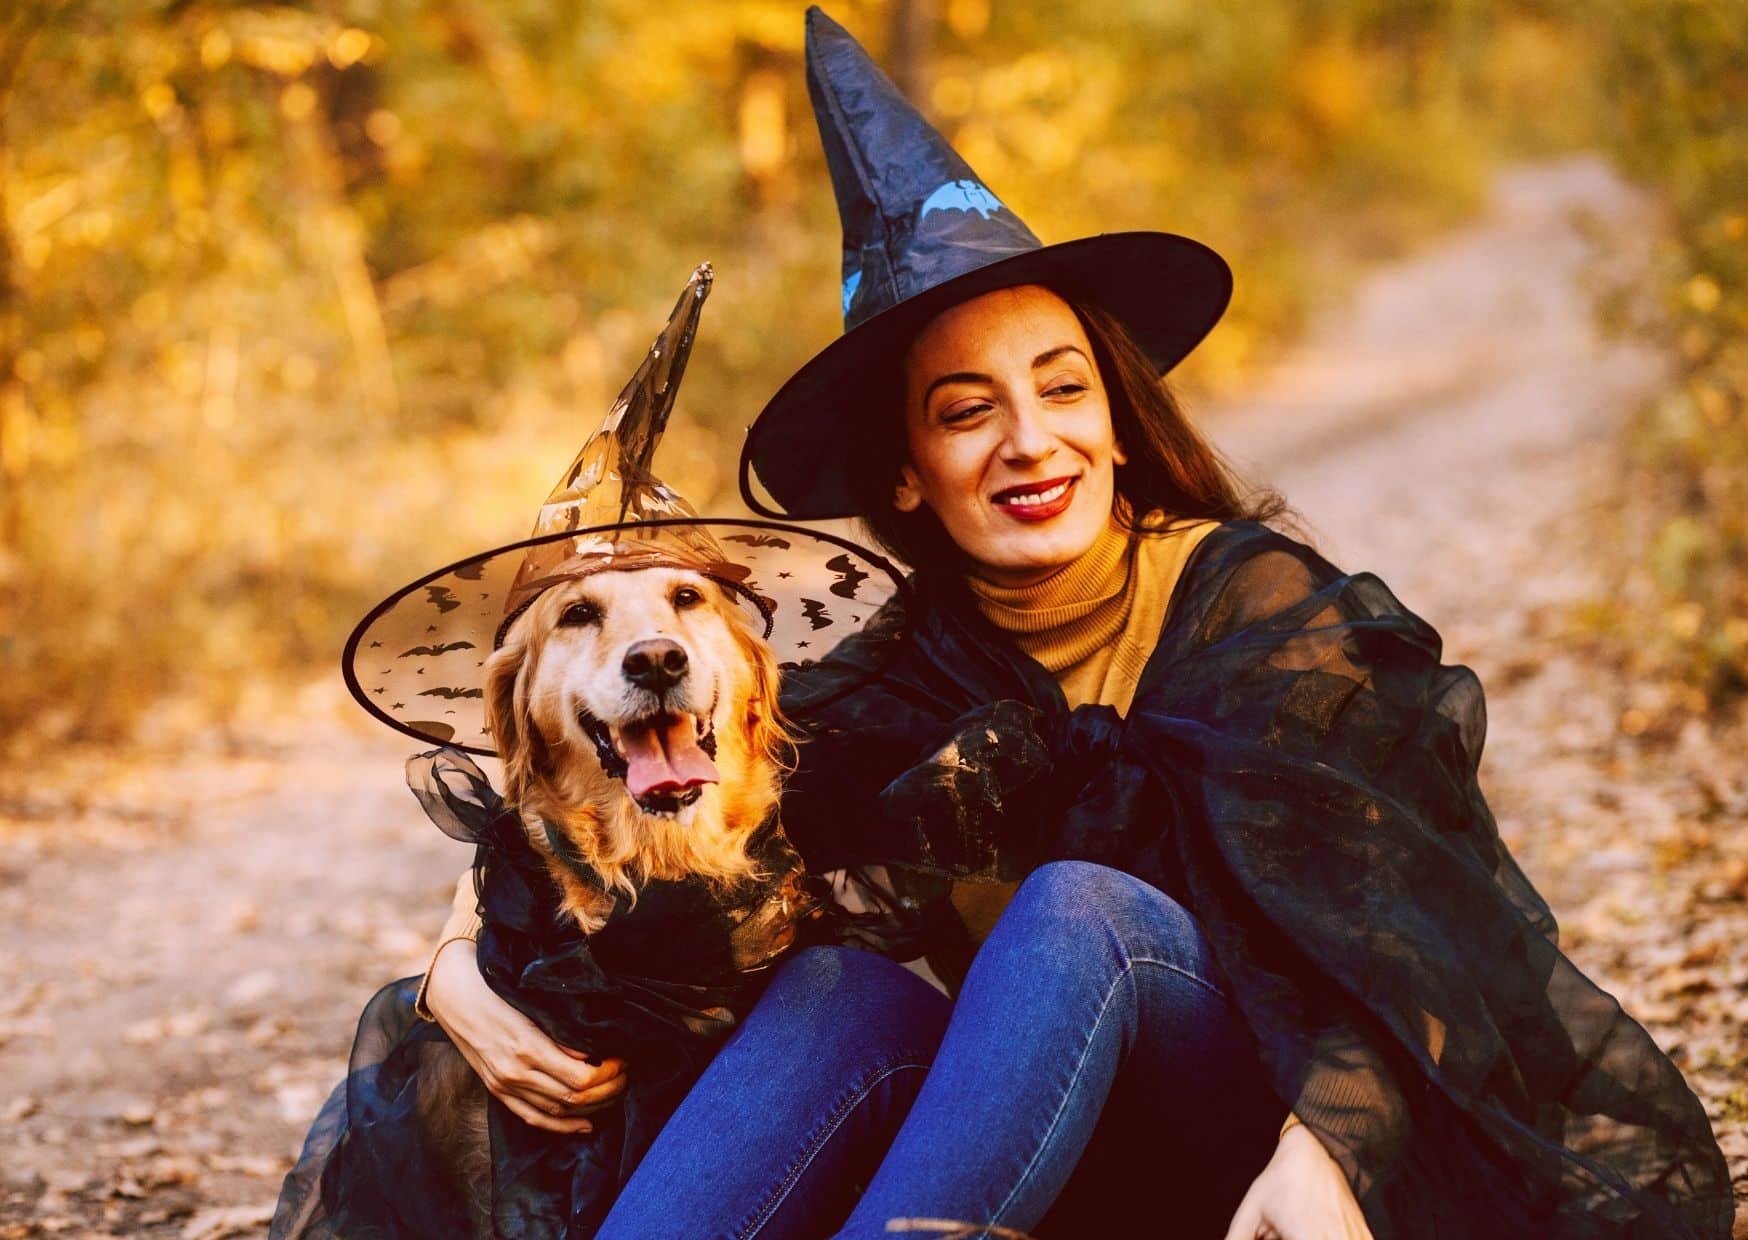 Capture The Memories With A Photo Booth For Dogs - Halloween Party For Dogs | Pawcool ™